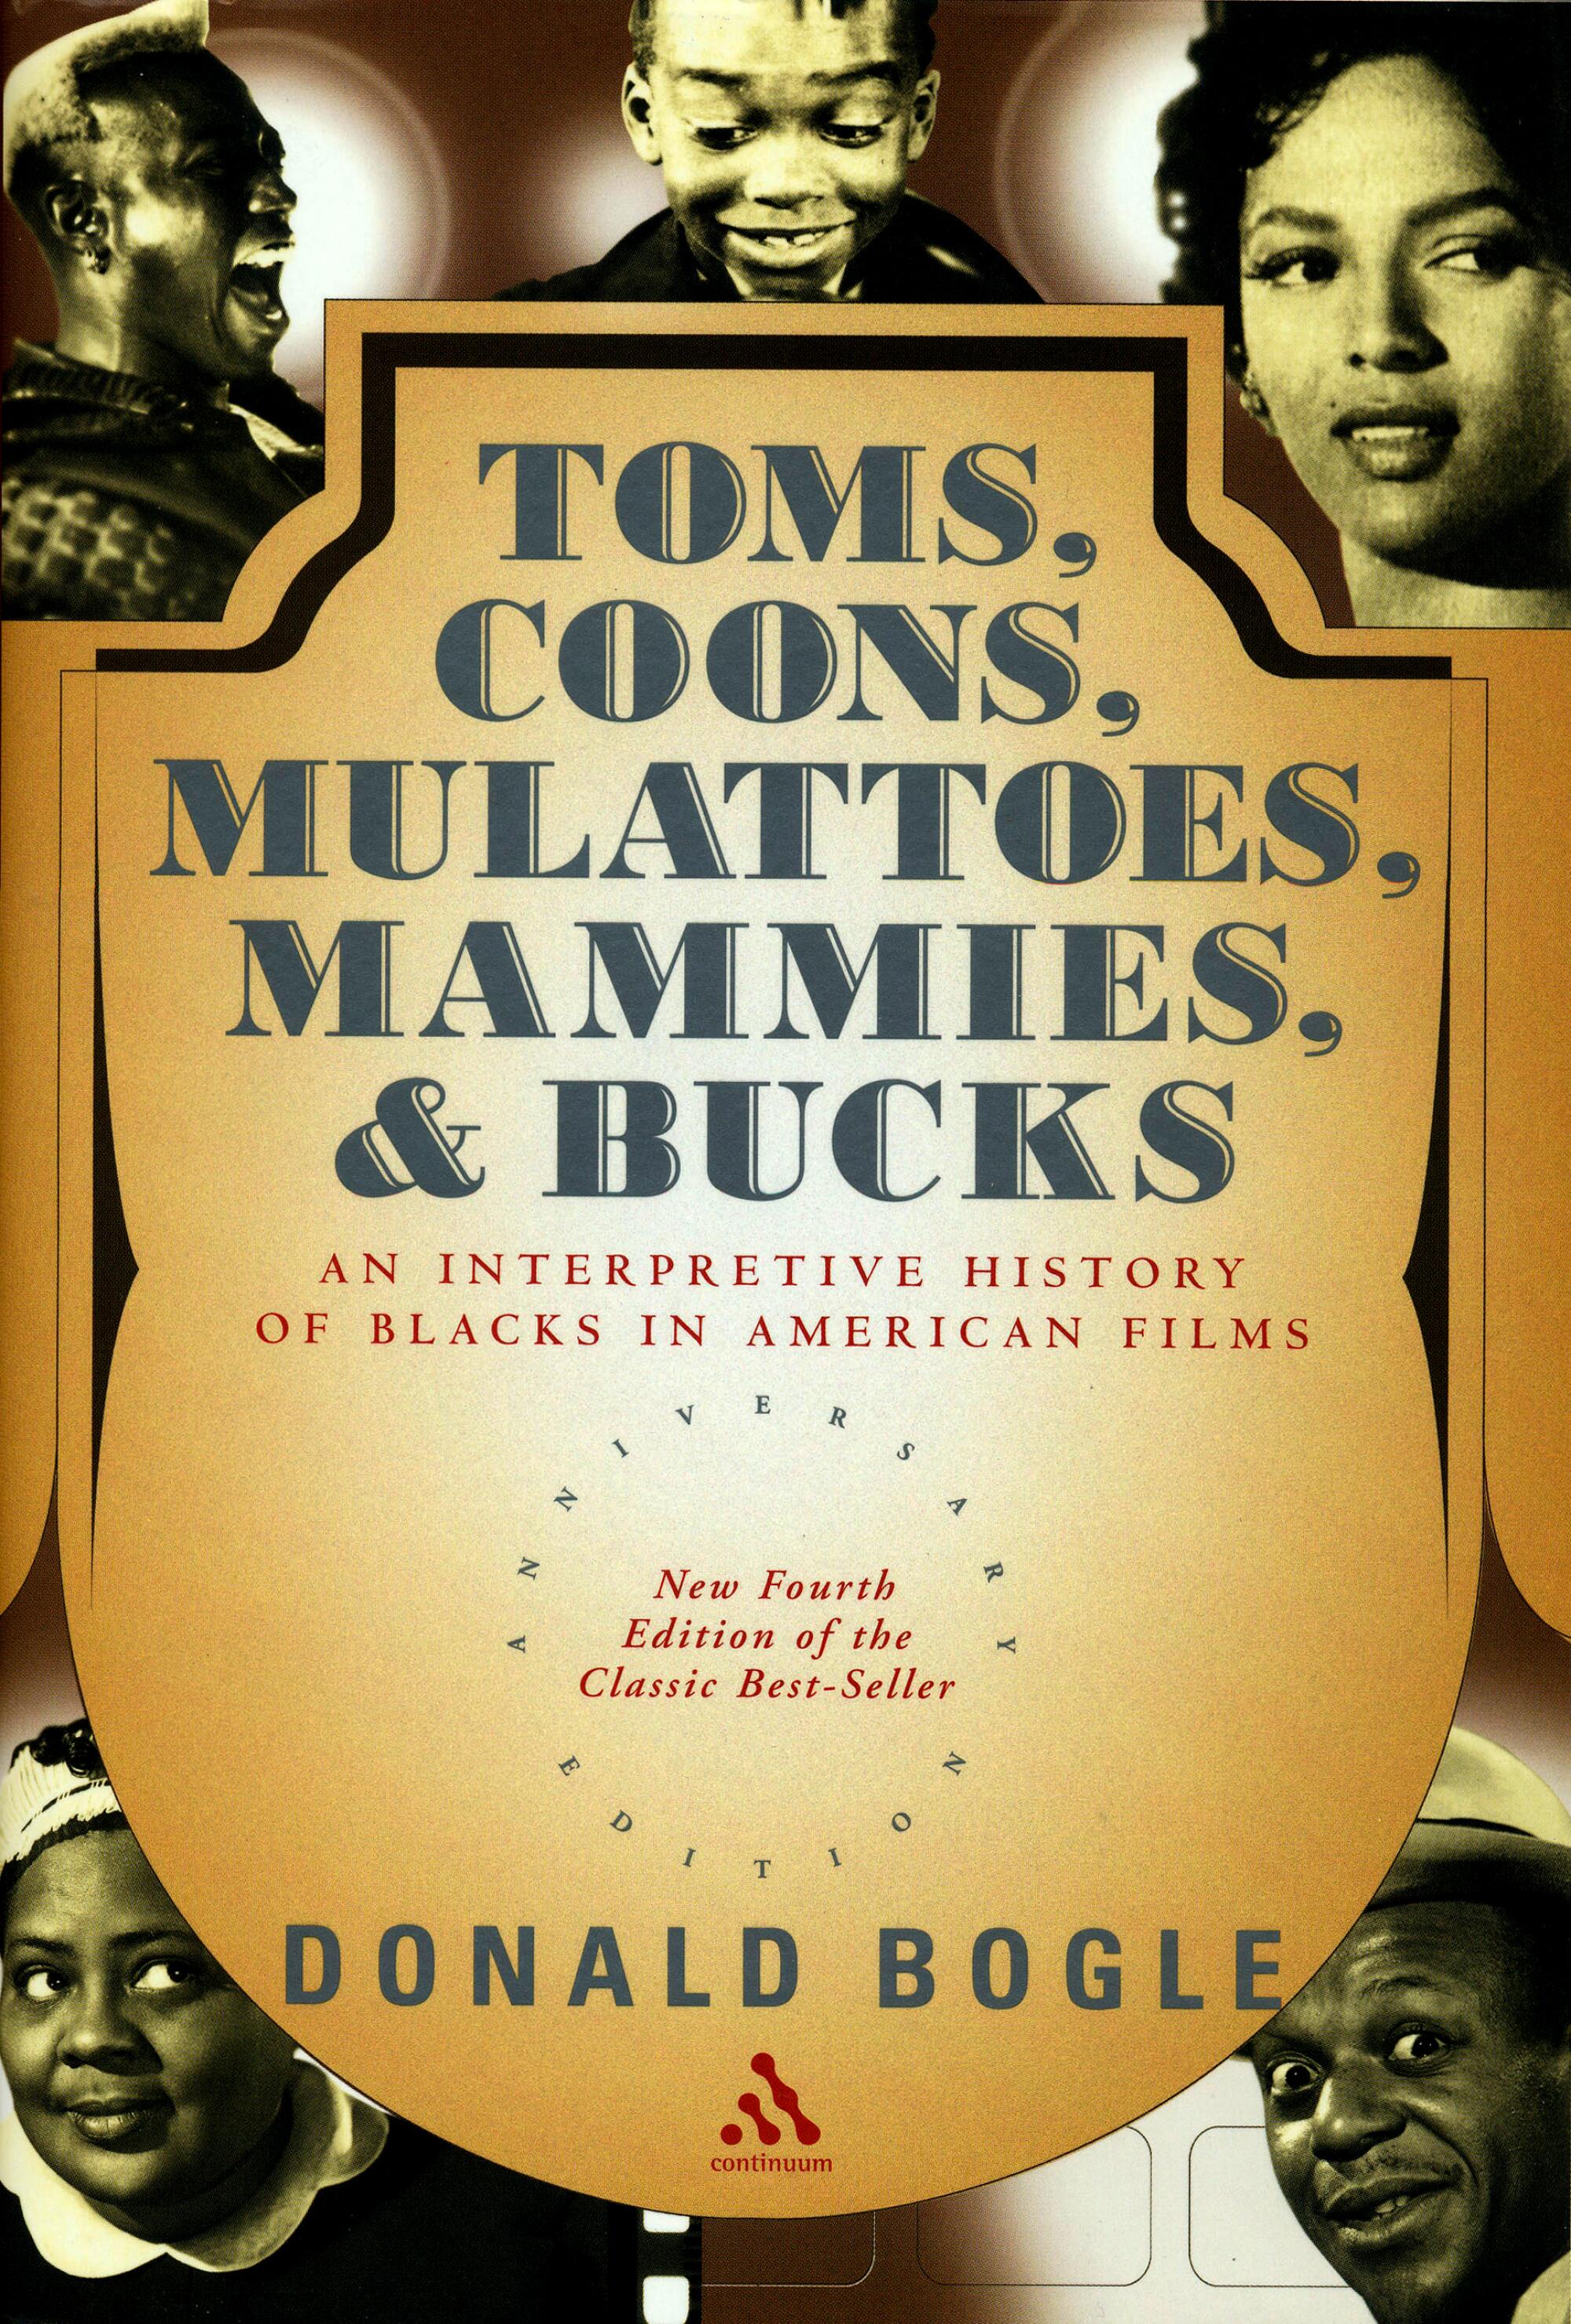 "Toms, Coons, Mulattoes, Mammies, and Bucks: An Interpretive History of Blacks in American Films" by Donald Bogle